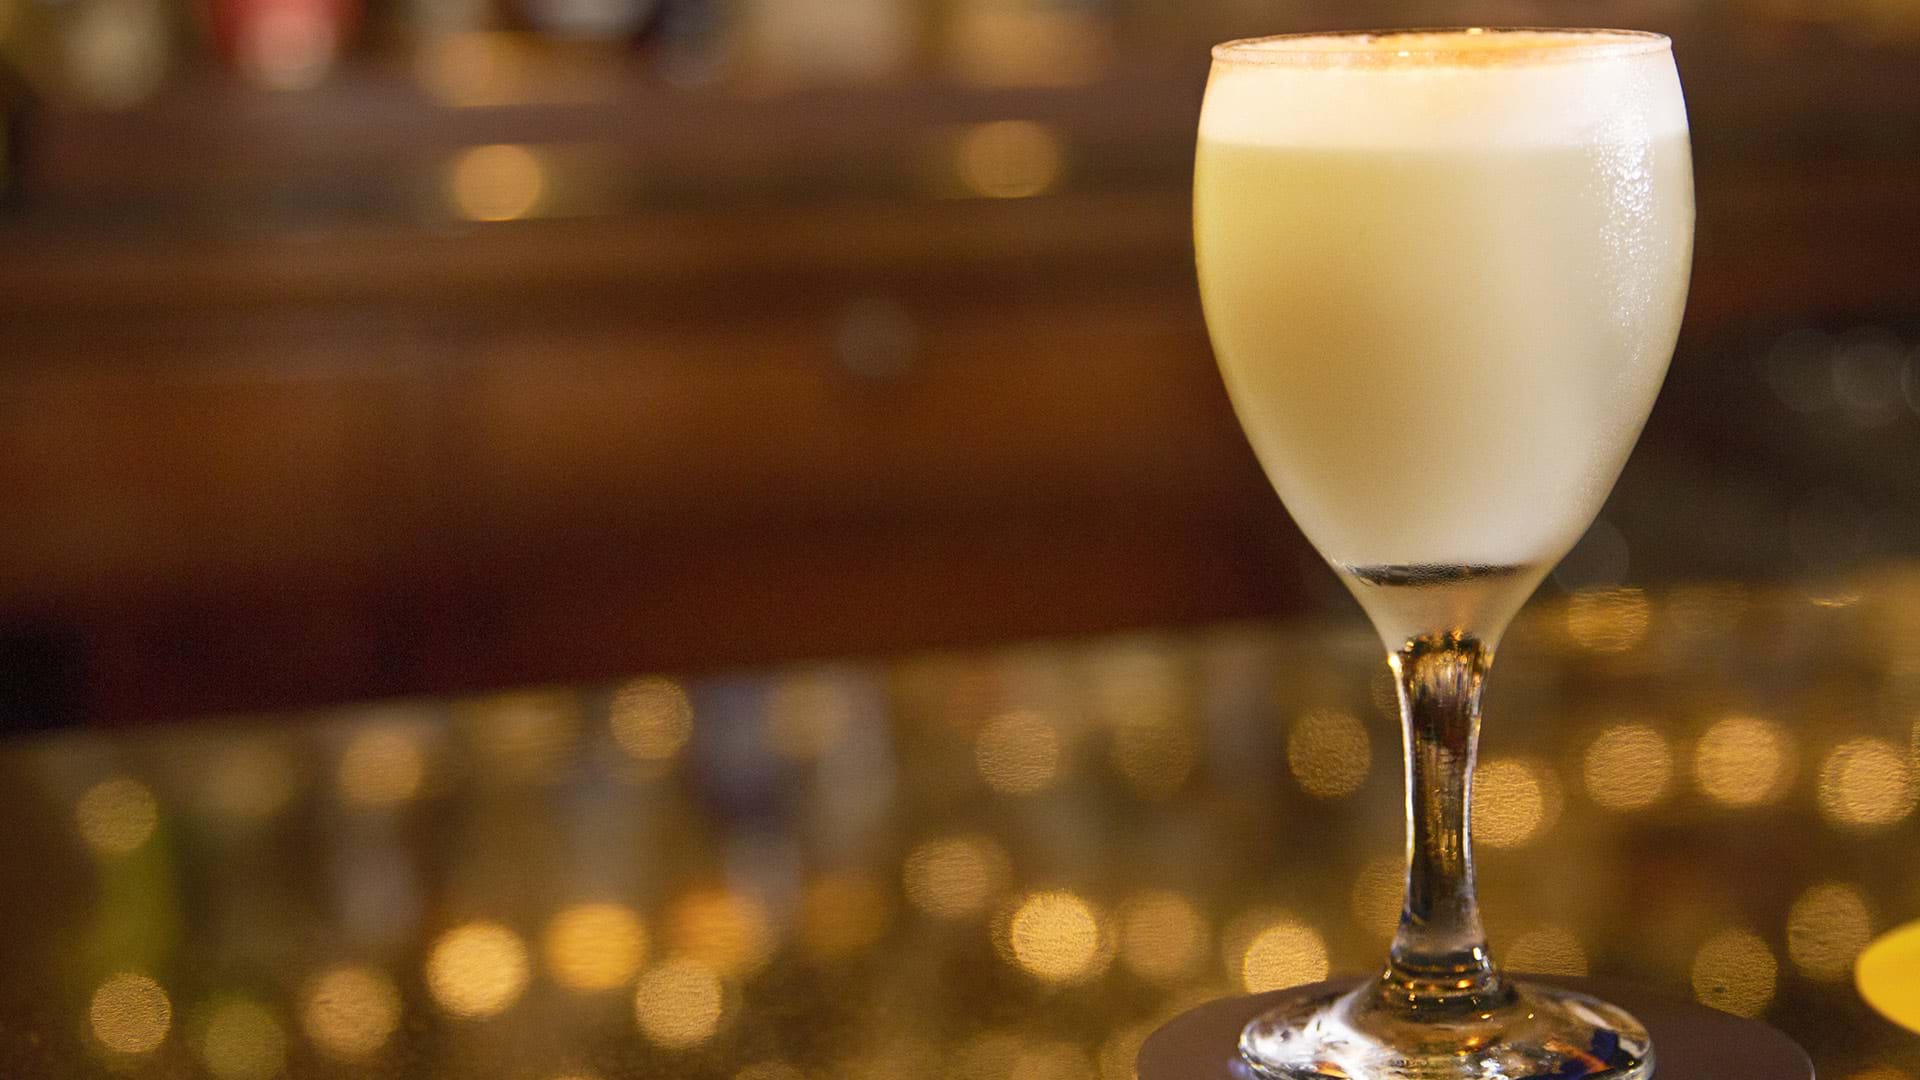 Pisco sour: history and preparation of the majestic Peruvian cocktail